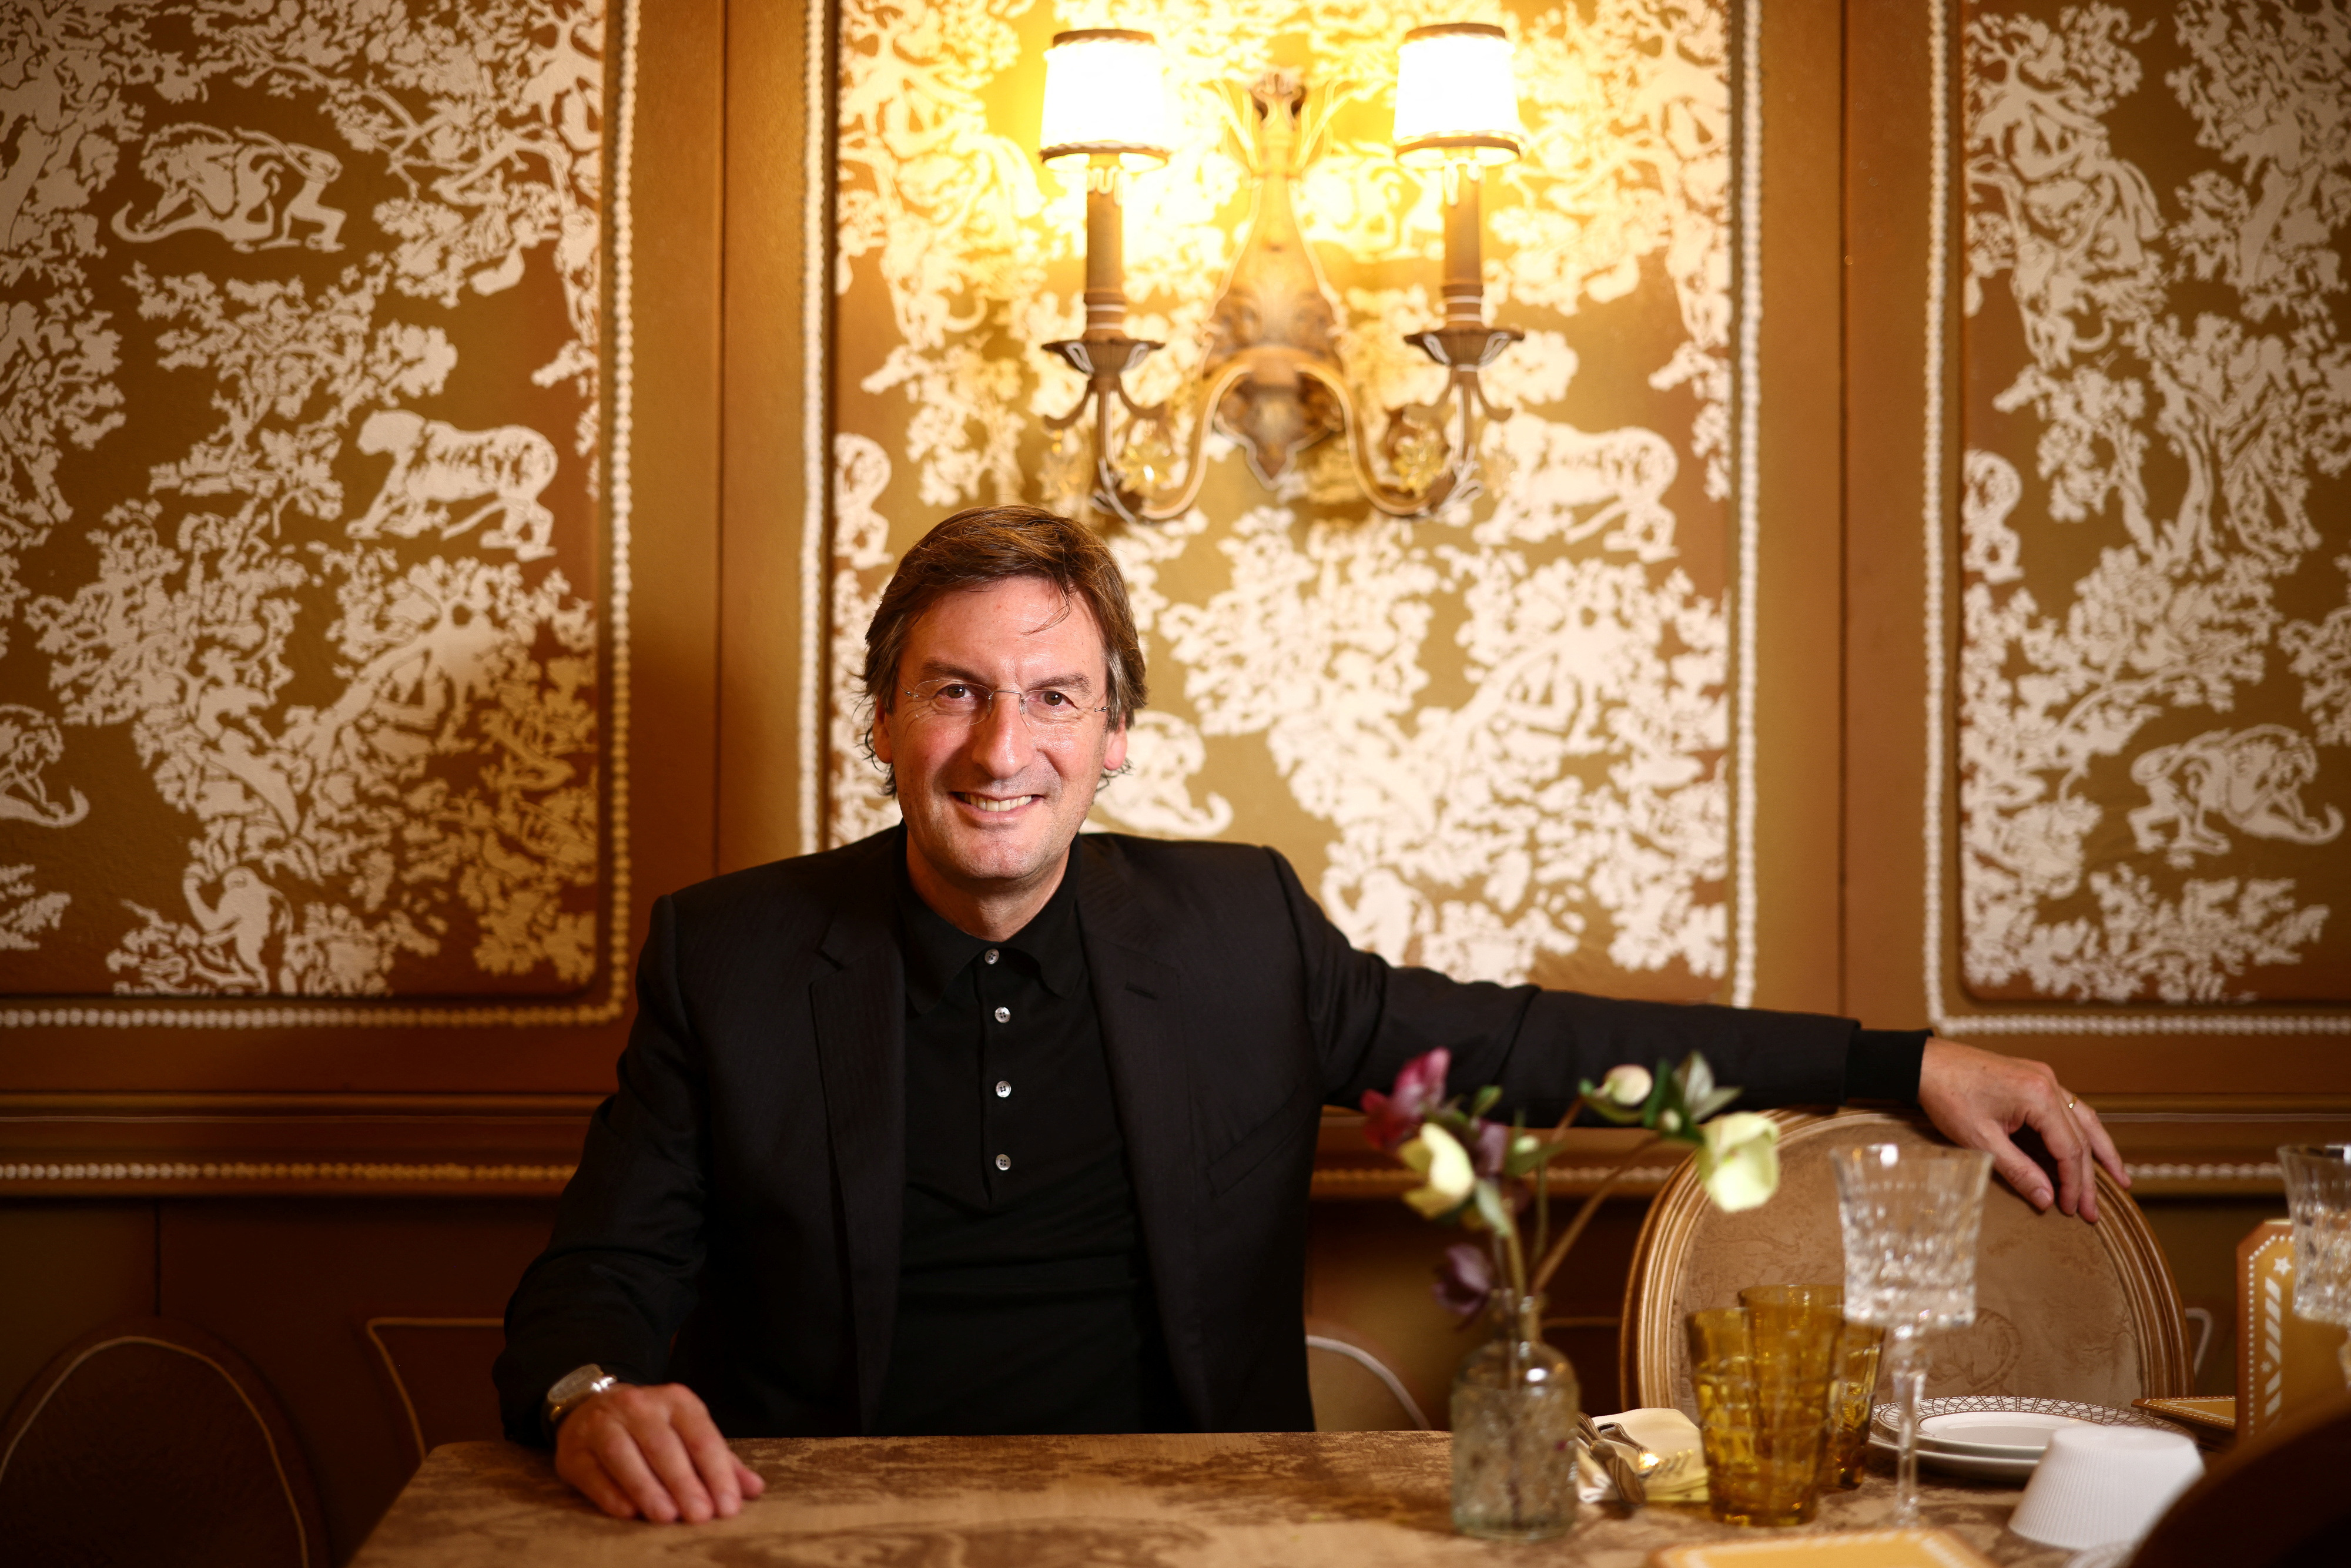 Dior CEO Pietro Beccari poses following an interview with Reuters at the Dior cafe at Harrods in London